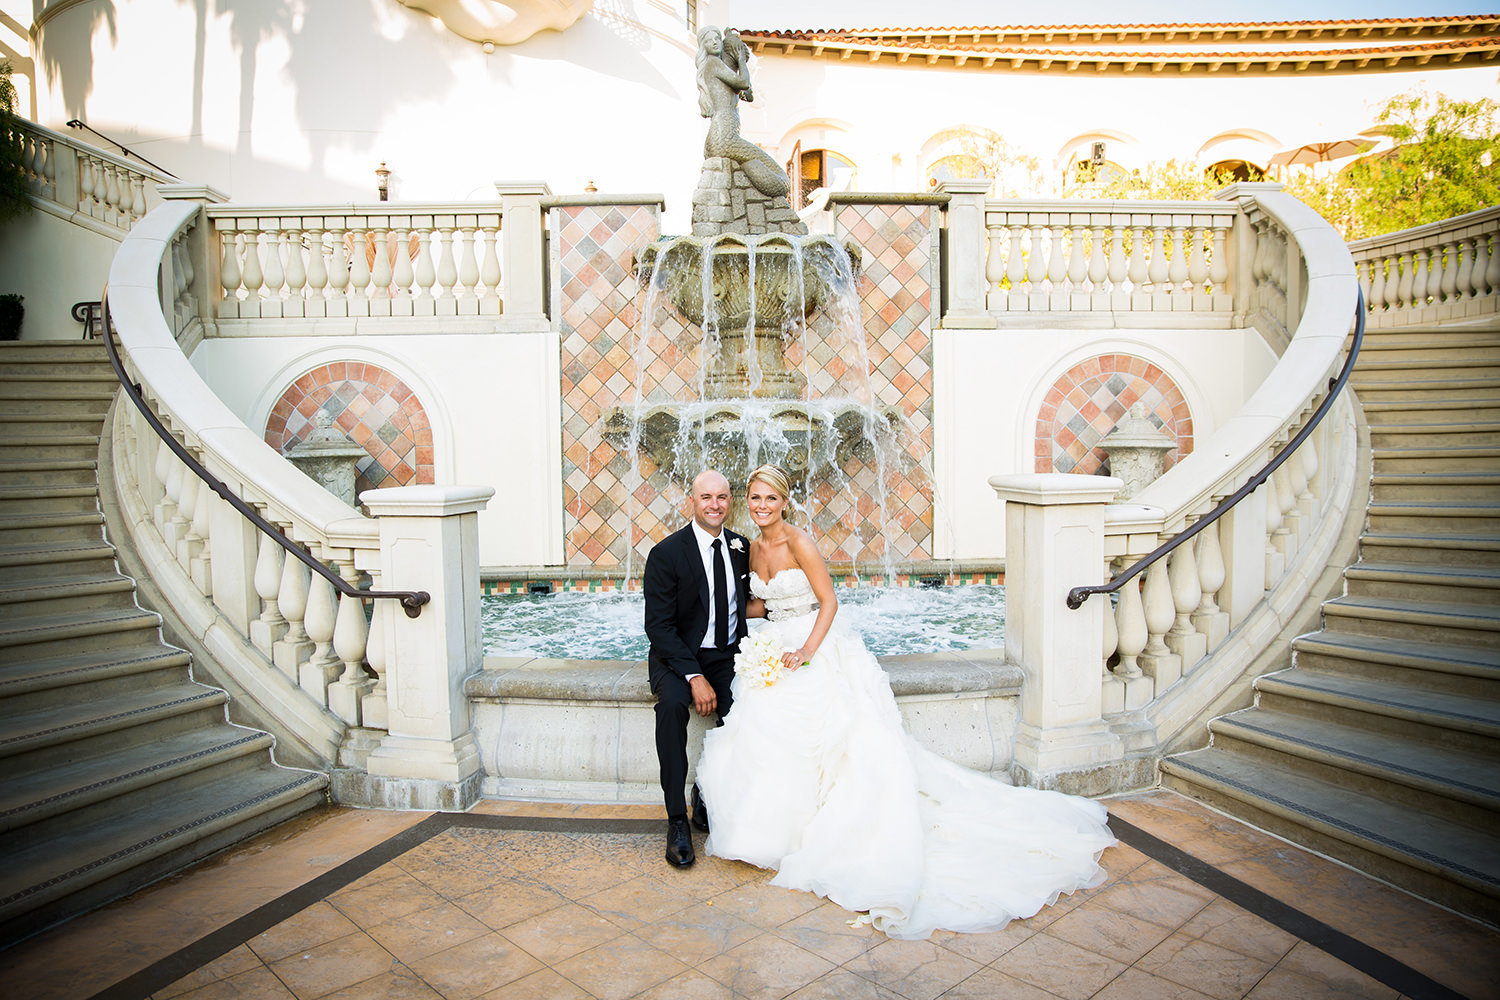 The water fountain between the staircases sets the perfect scene for this romantic portrait